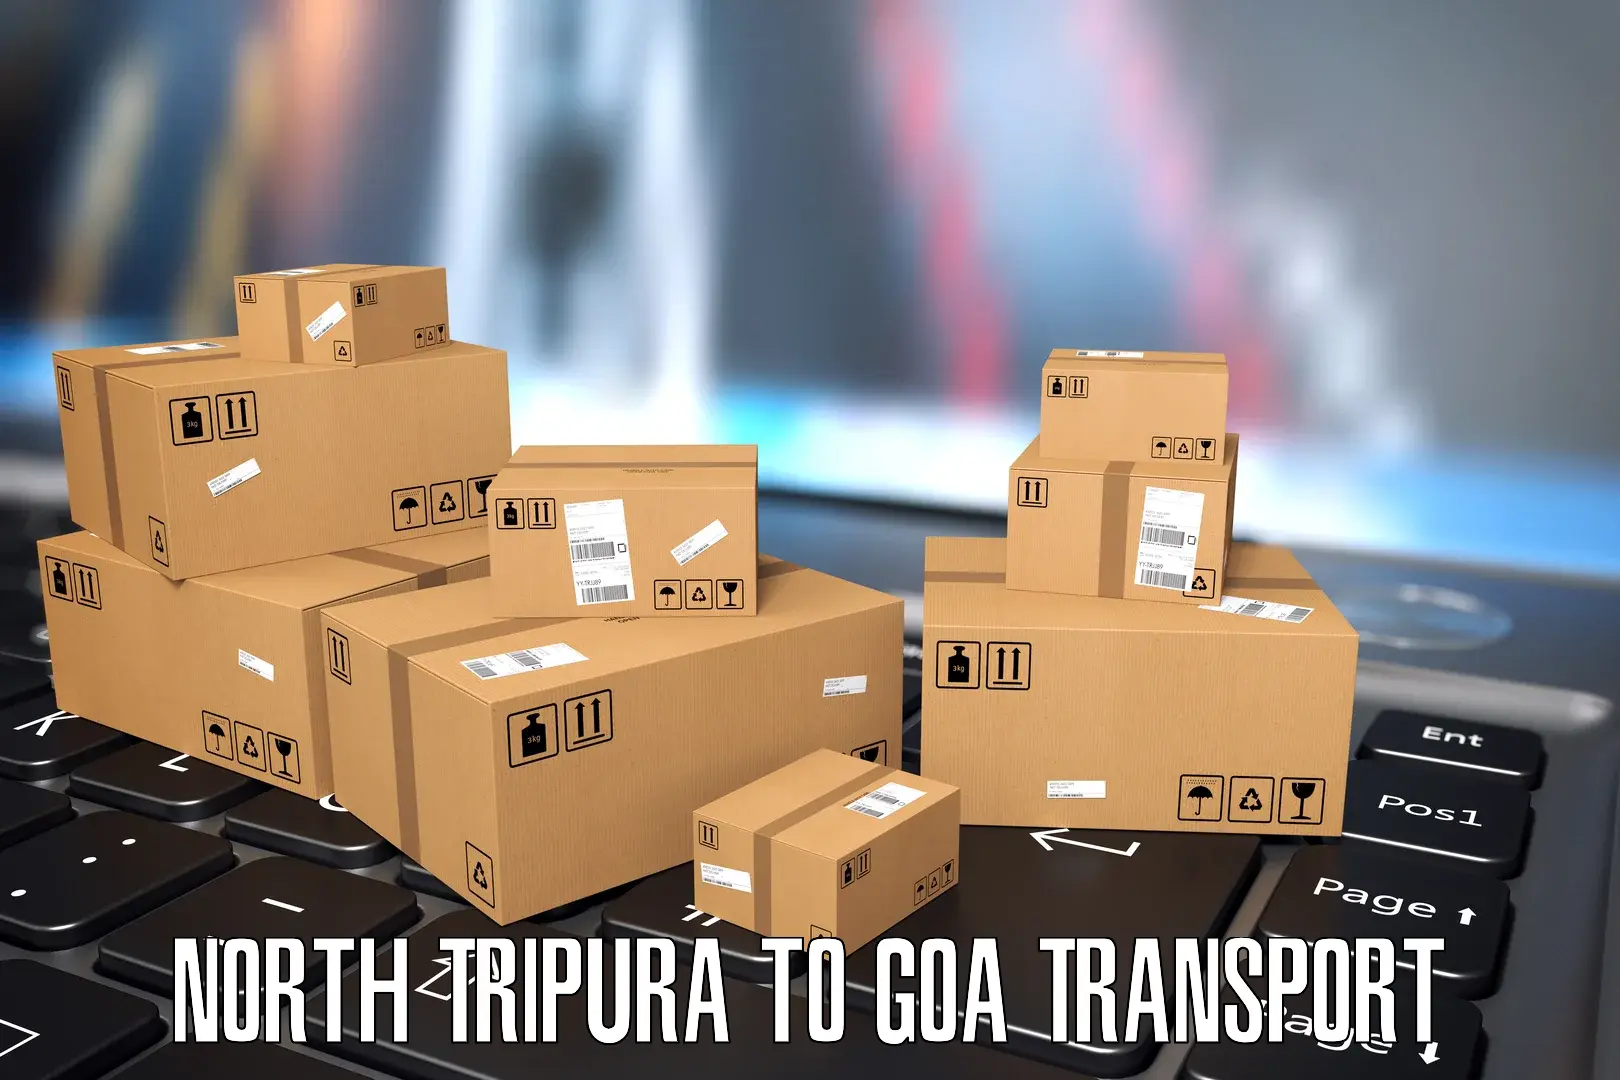 Commercial transport service North Tripura to NIT Goa